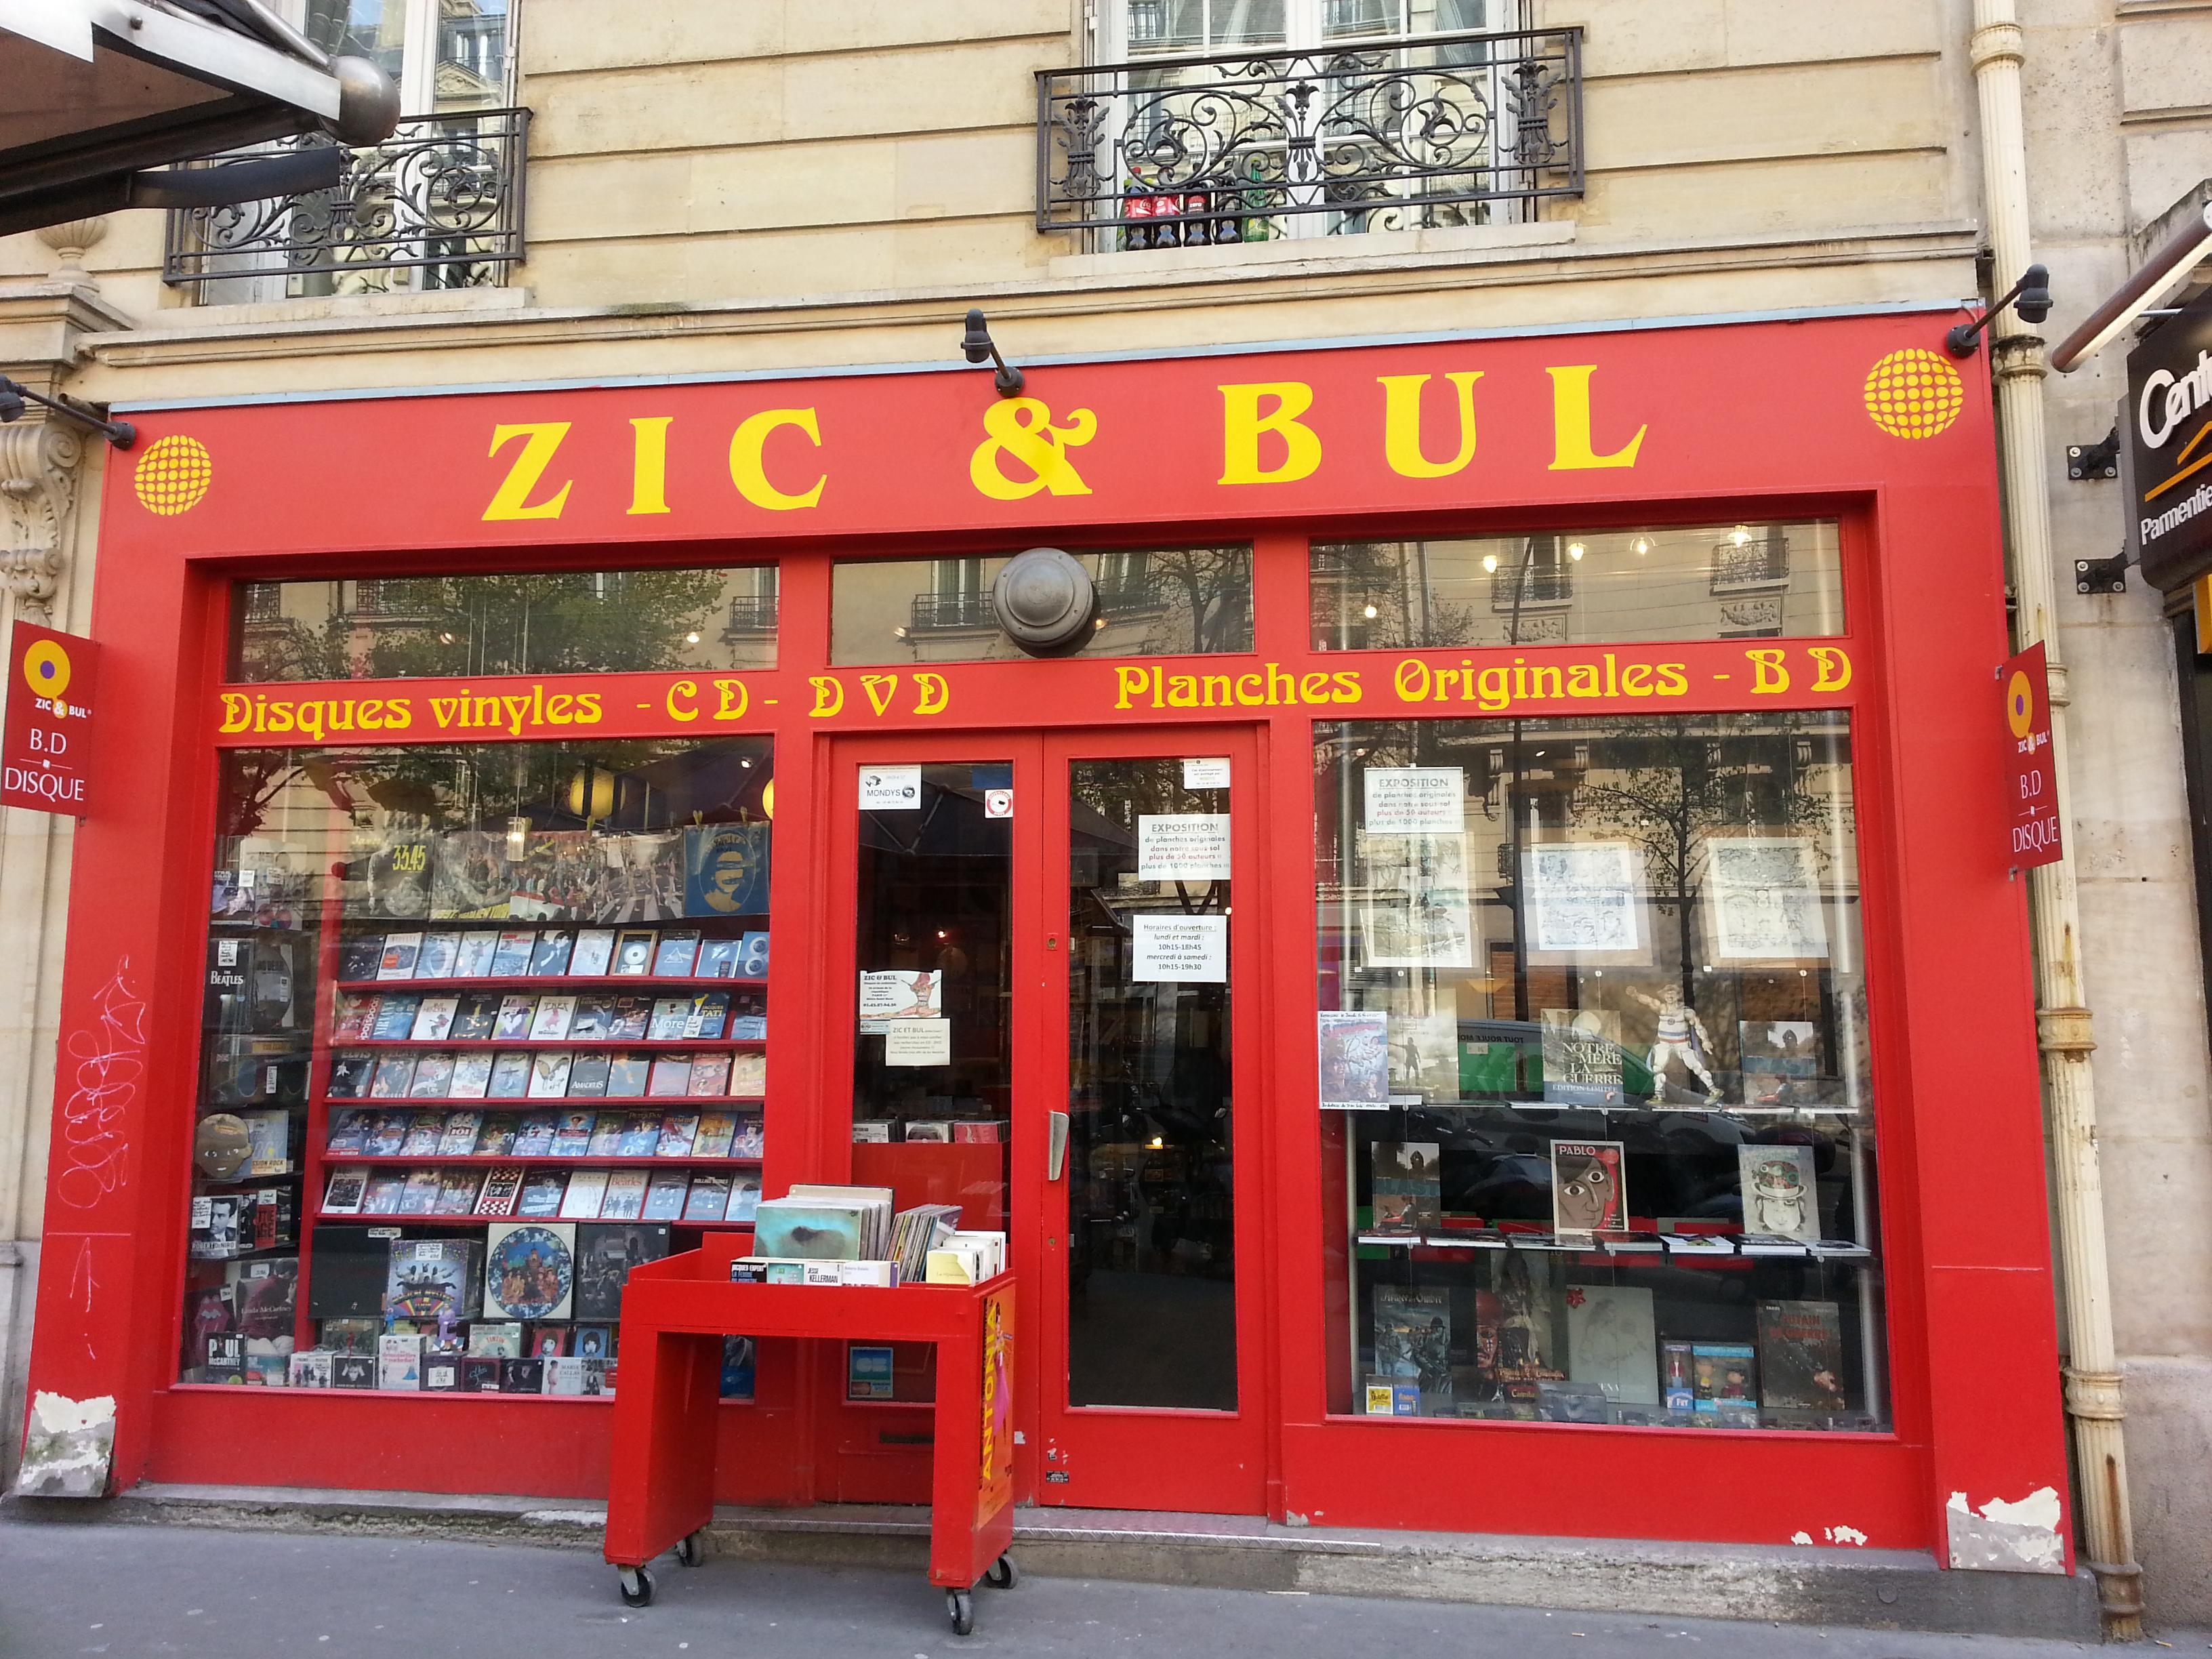 Cover image of this place Zic & Bul